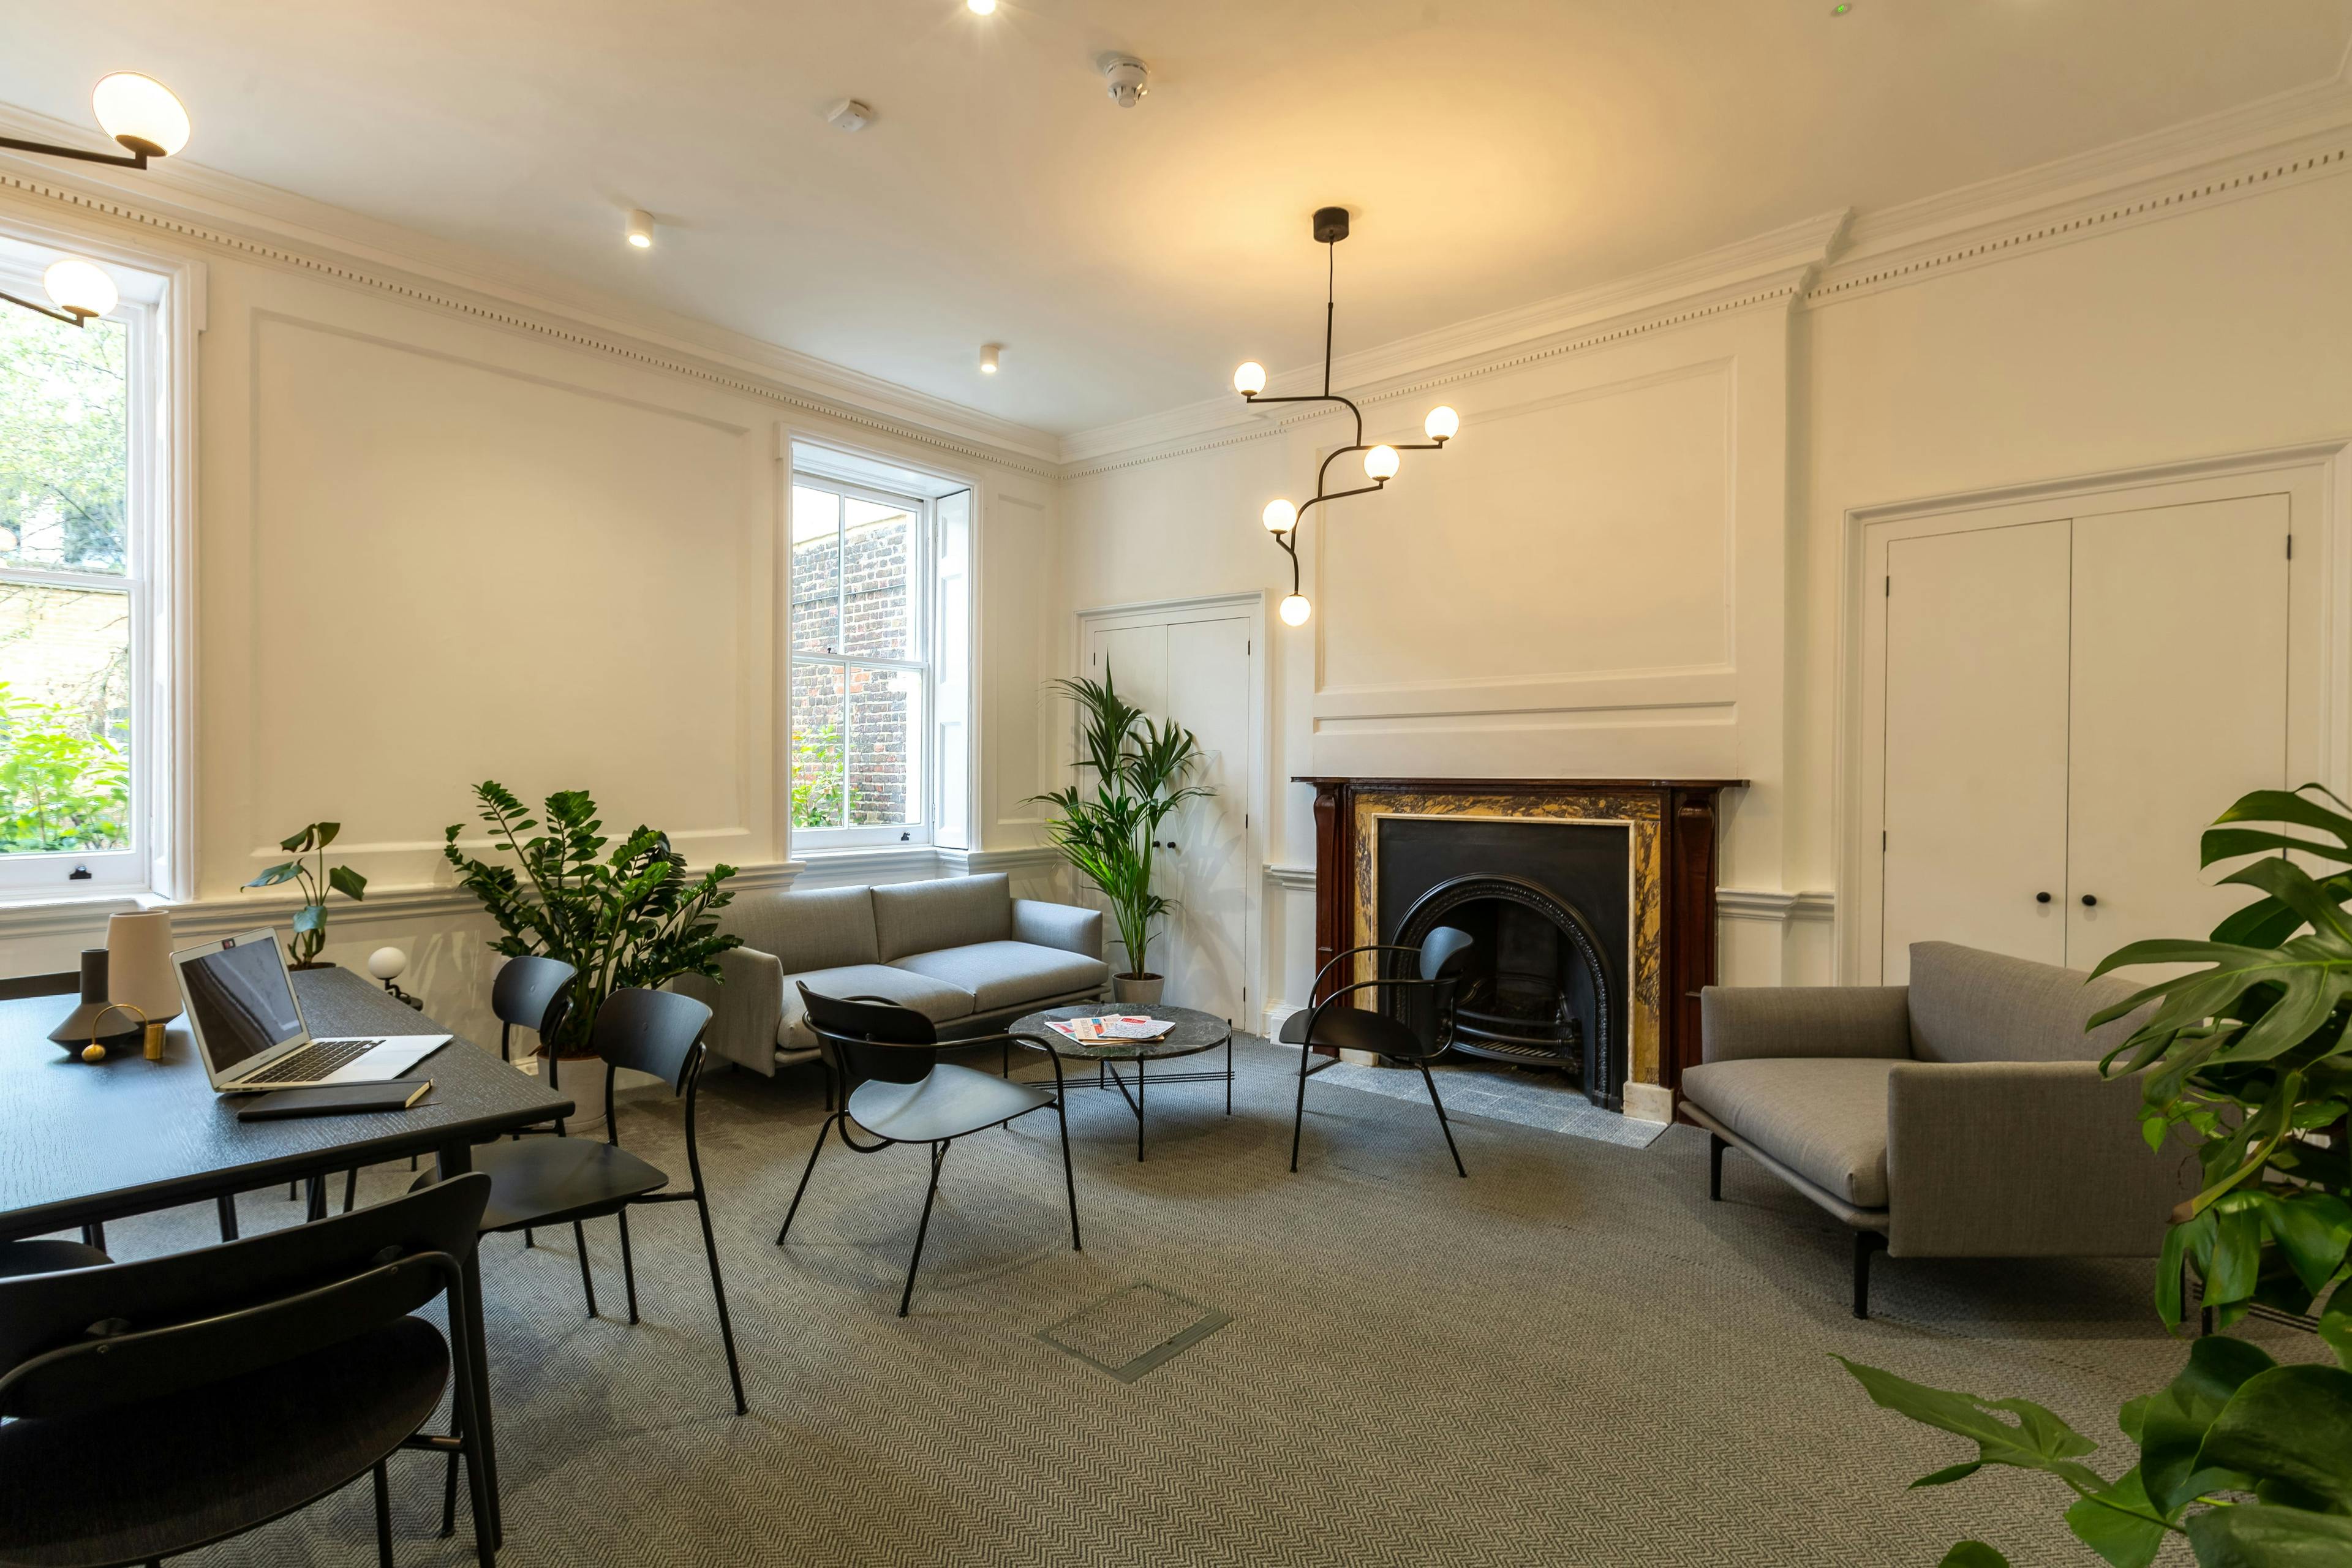 Holborn - 4-6 Person Office - Bloomsbury Place